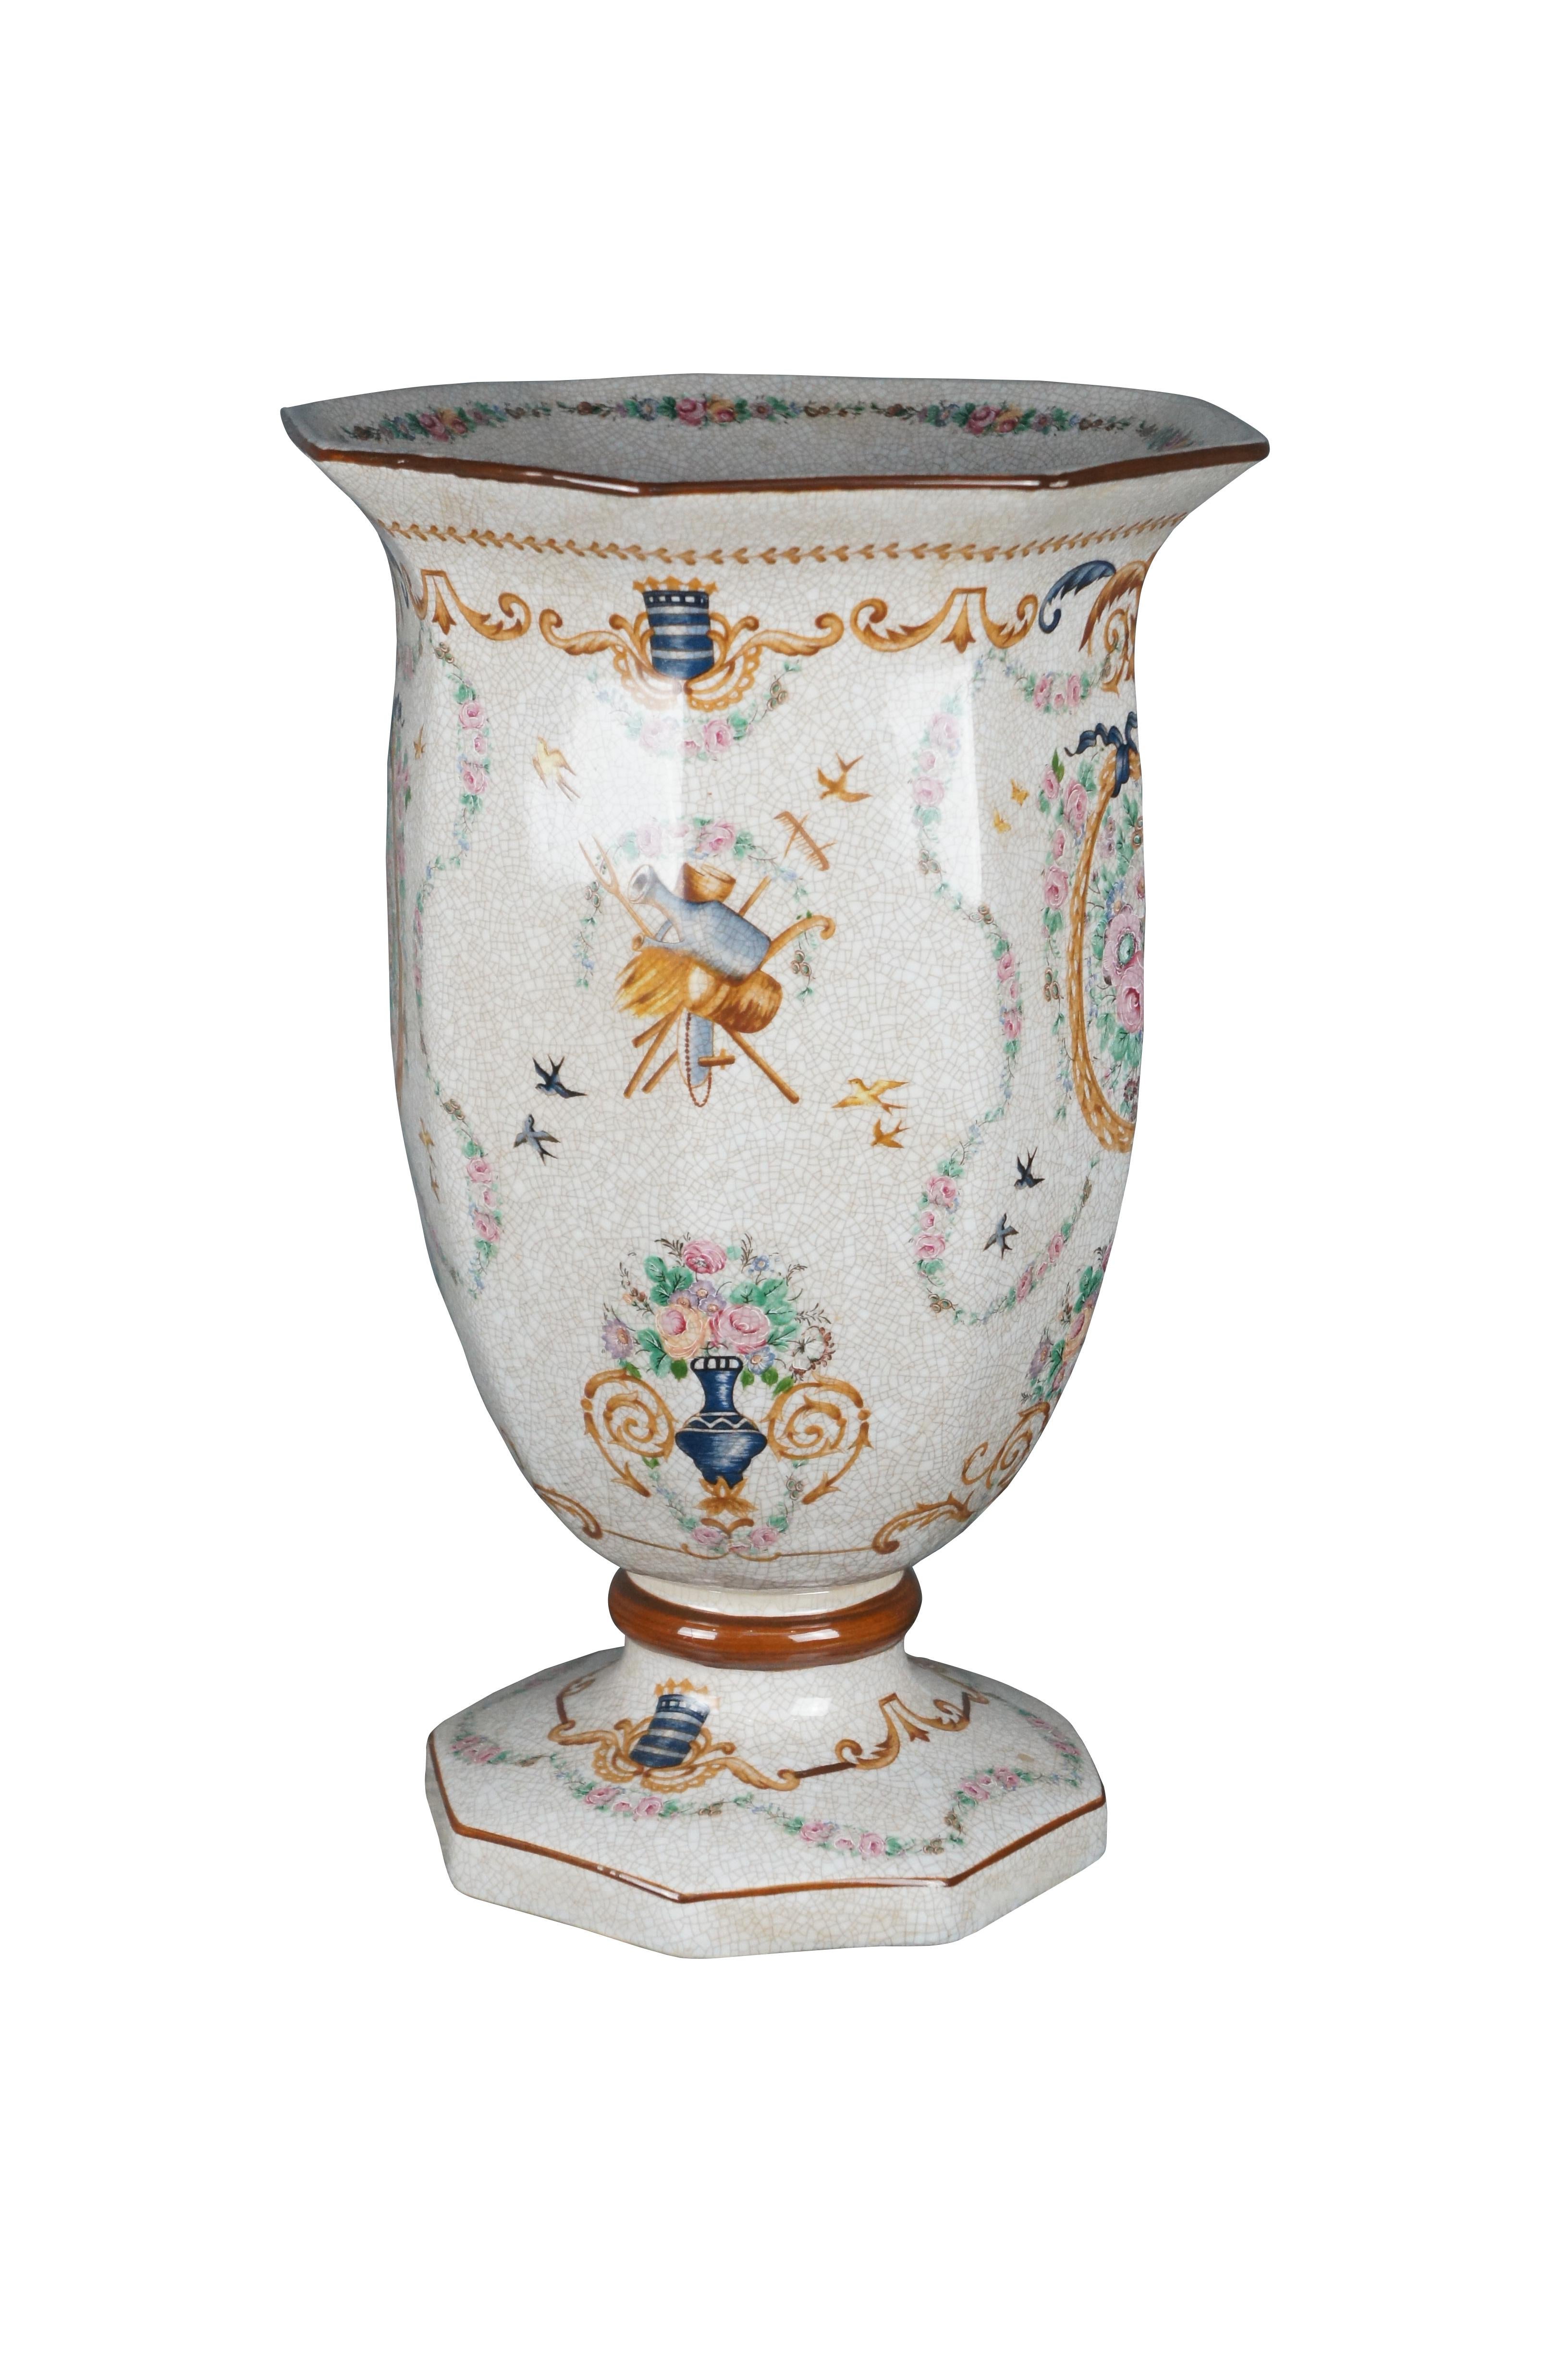 Chinese porcelain footed Armorial vase. Features a polychrome finish over a crackle glaze with neoclassical and floral motifs.

Dimensions:
10